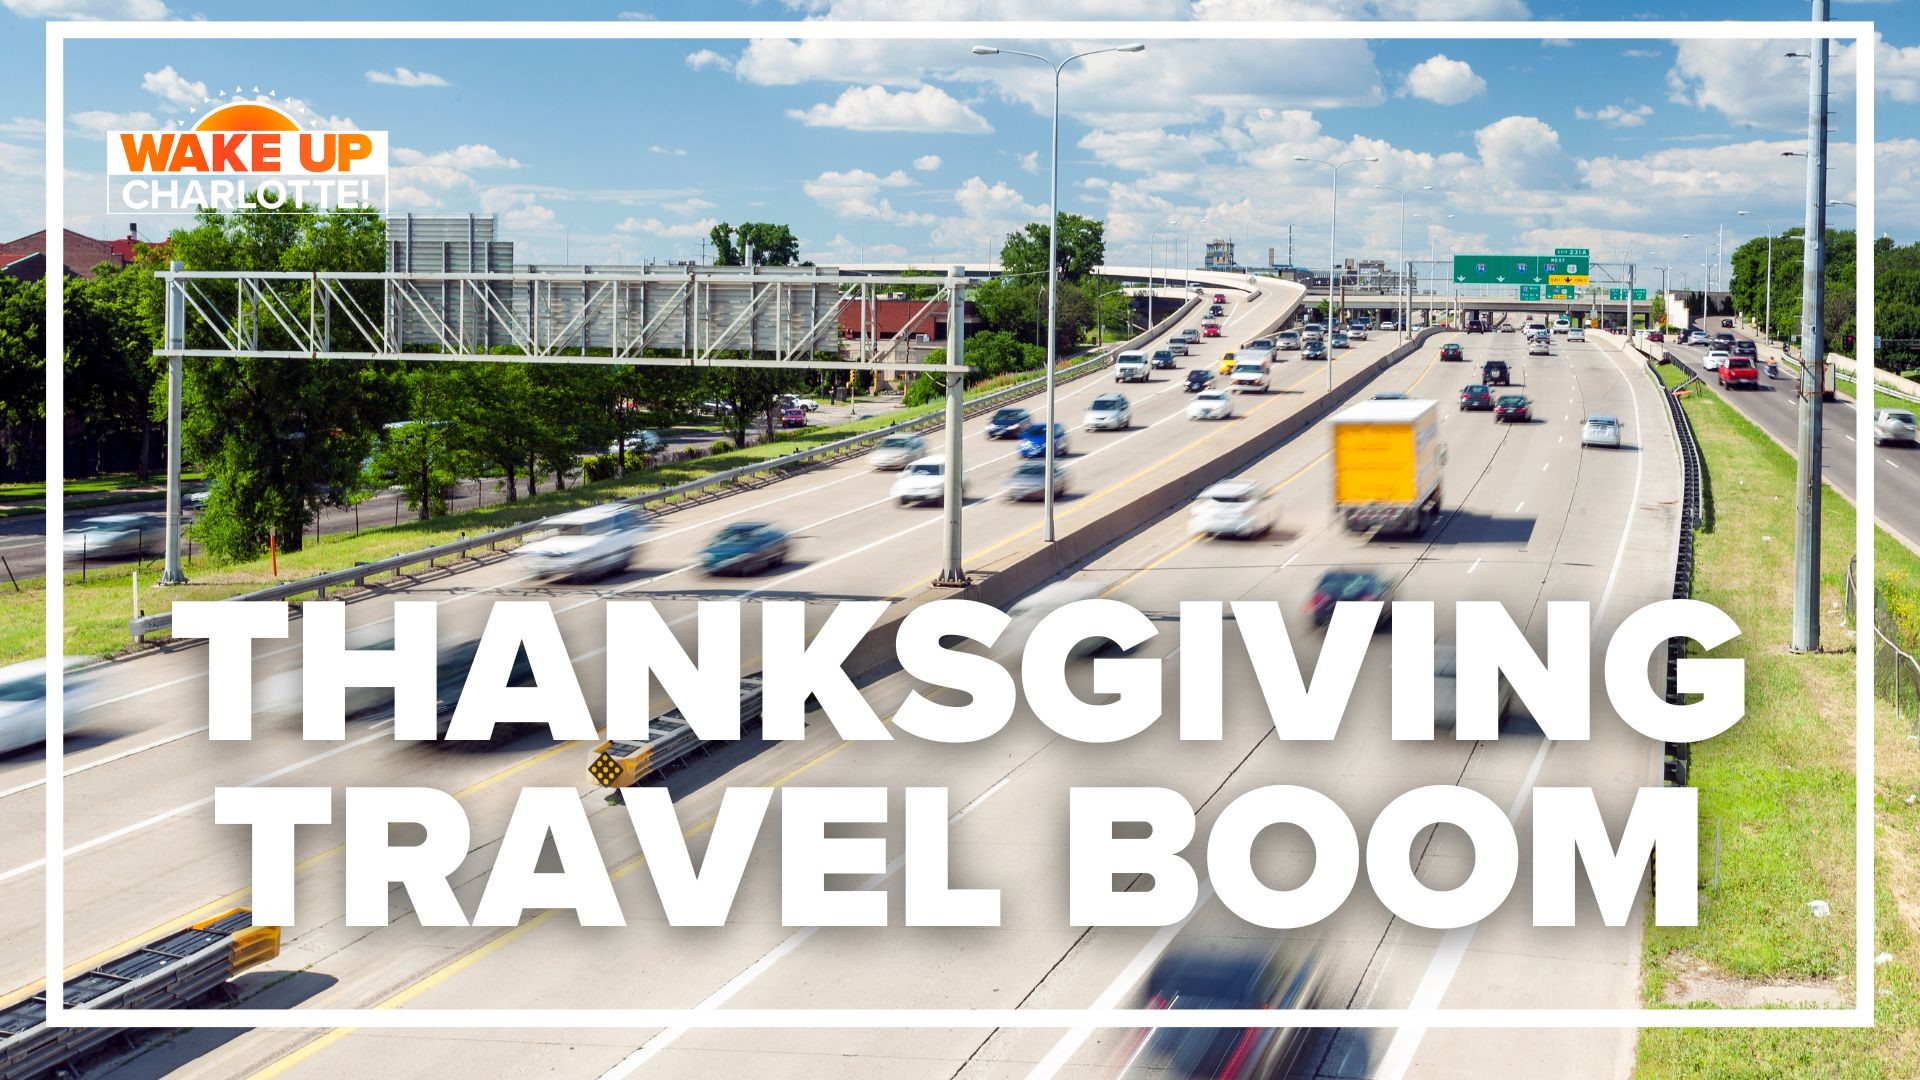 AAA predicts over 54 million Americans will travel over 50 miles for Thanksgiving. Will you join them on the roads or are you staying home this year?